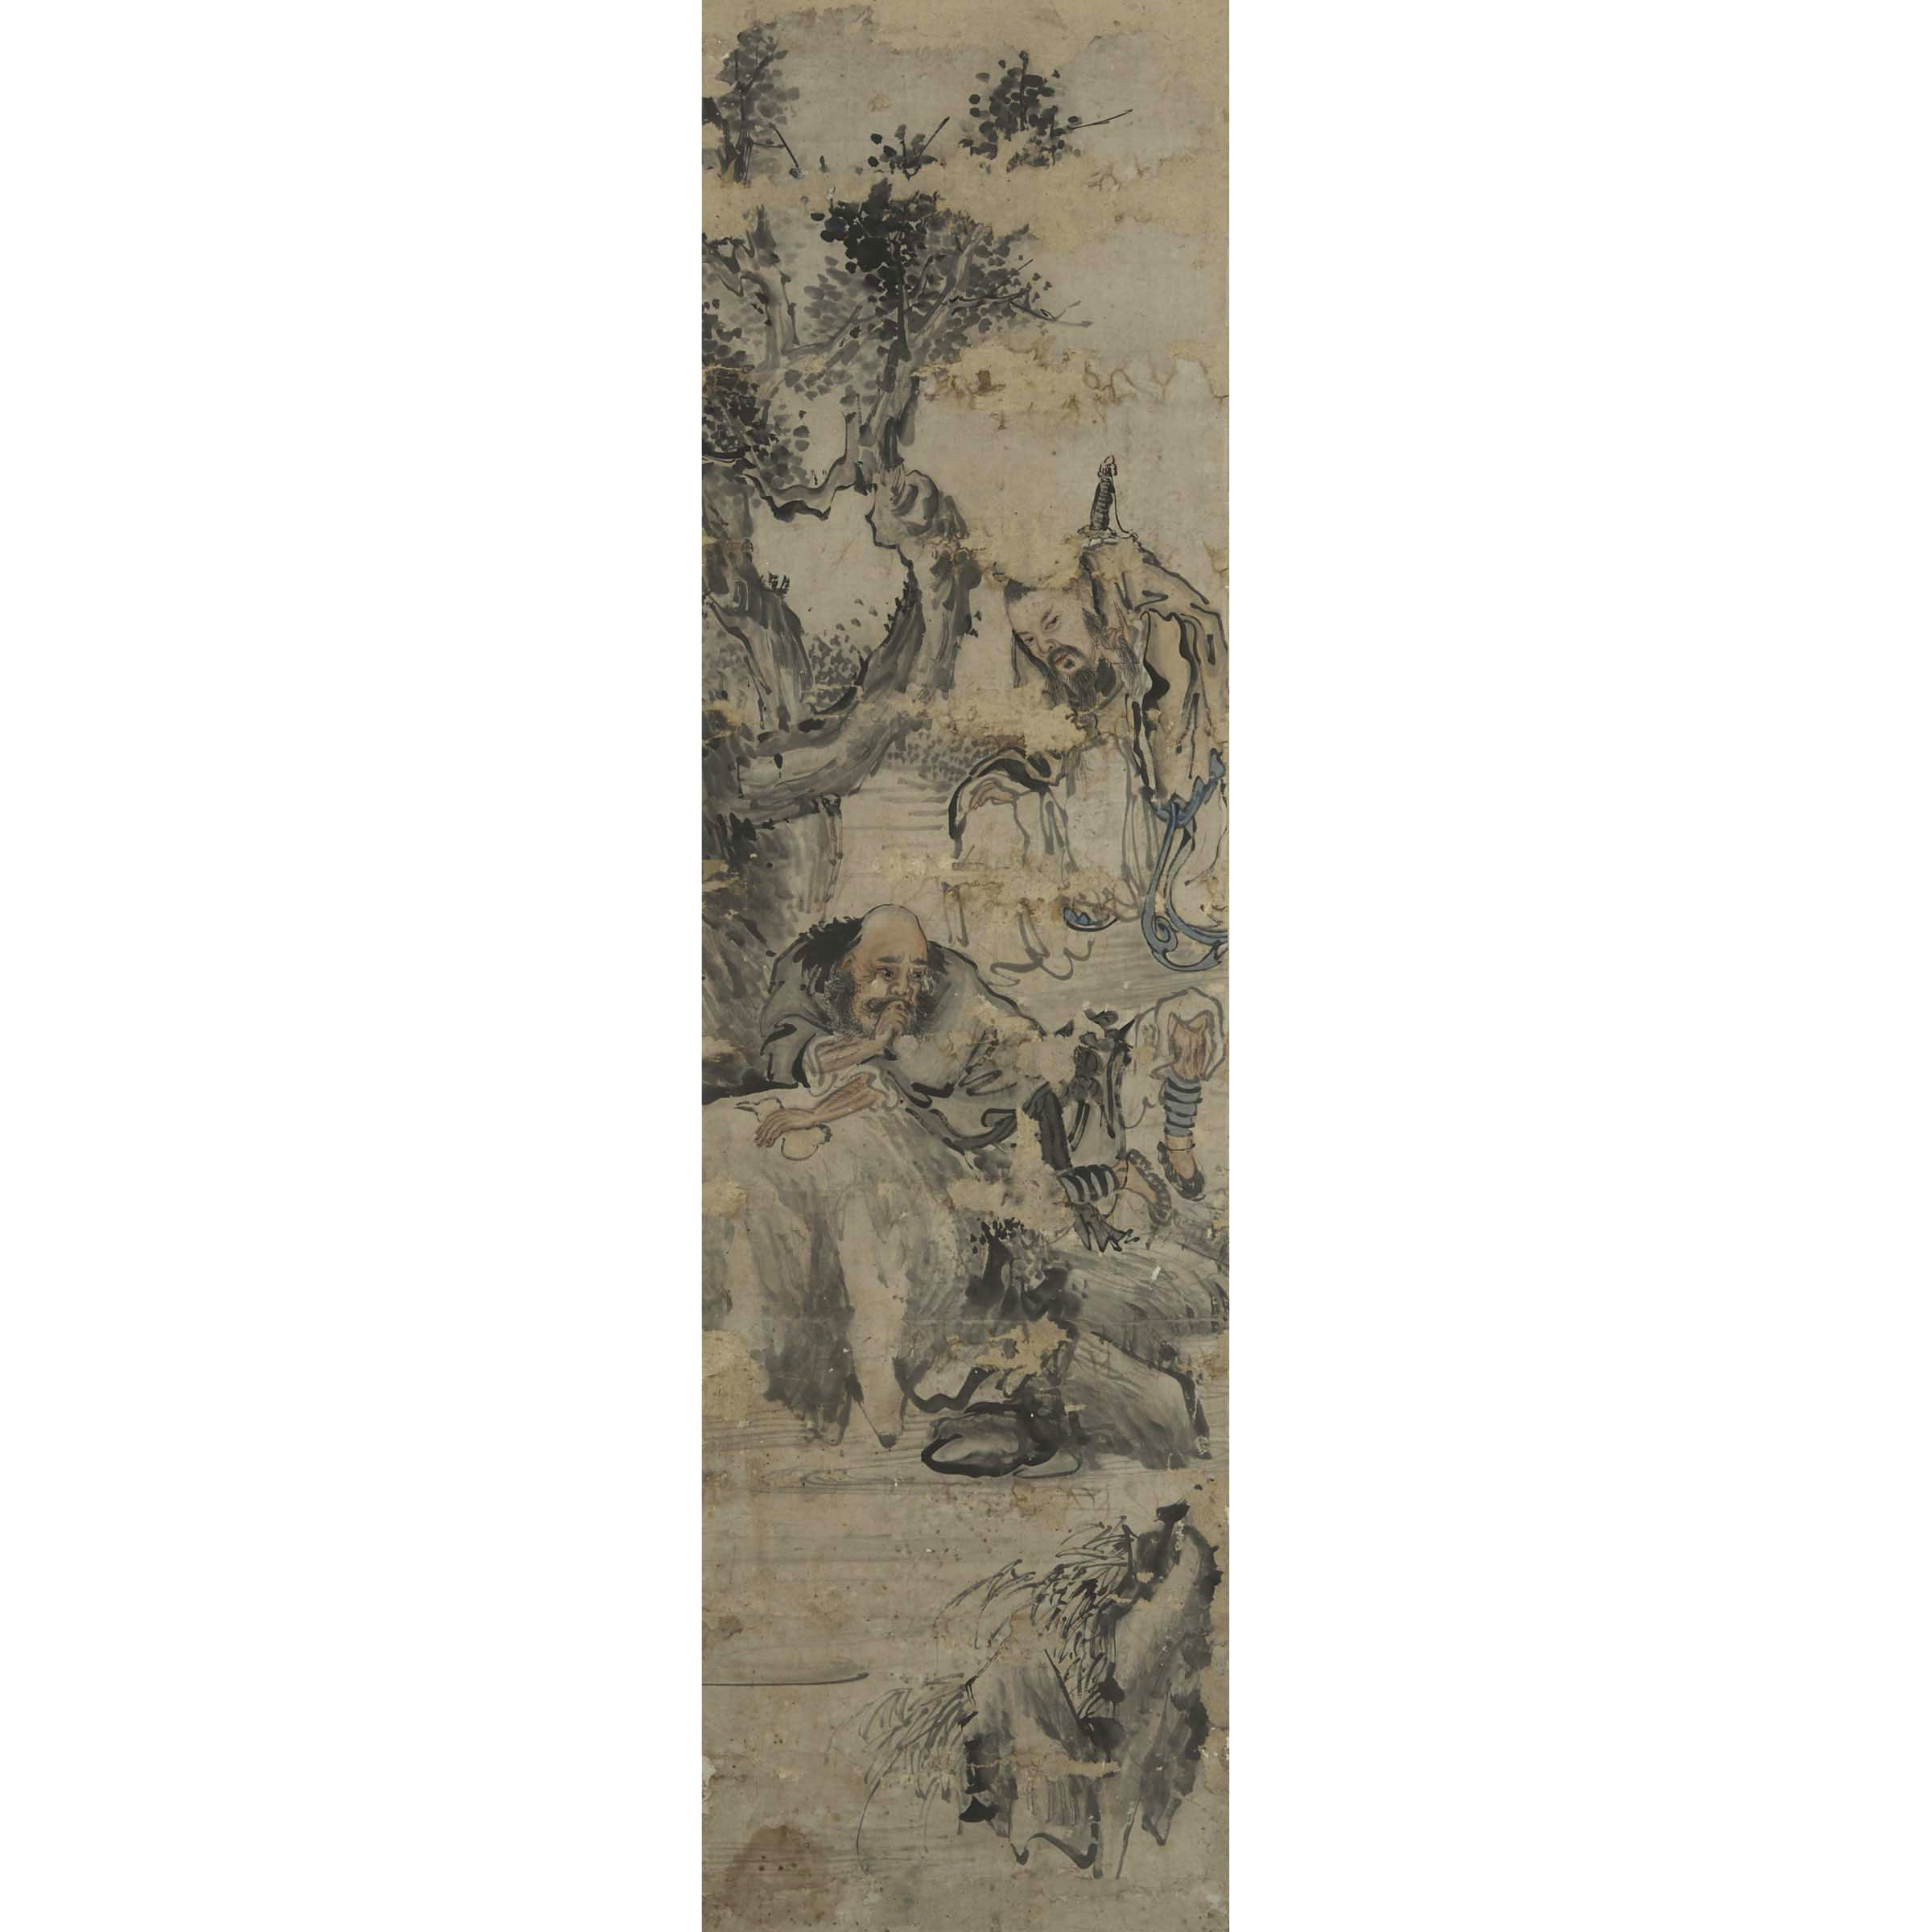 A Chinese Painting of Lü Dongbin and Li Tieguai Under Trees, Qing Dynasty